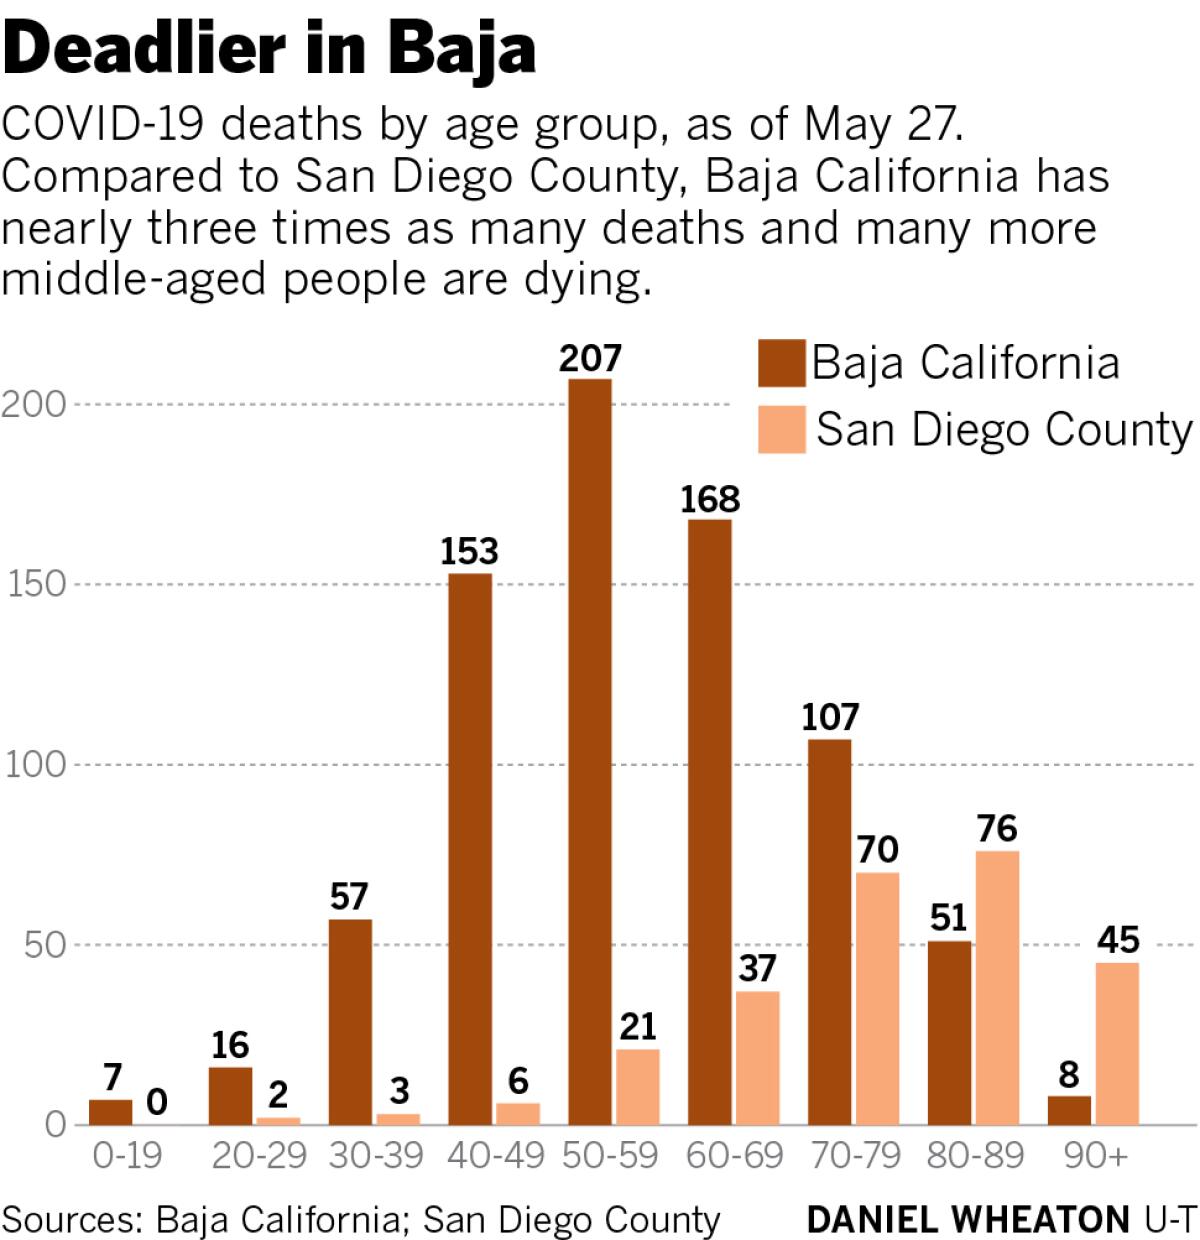 Deadlier in Baja COVID-19 deaths by age group, as of May 27.